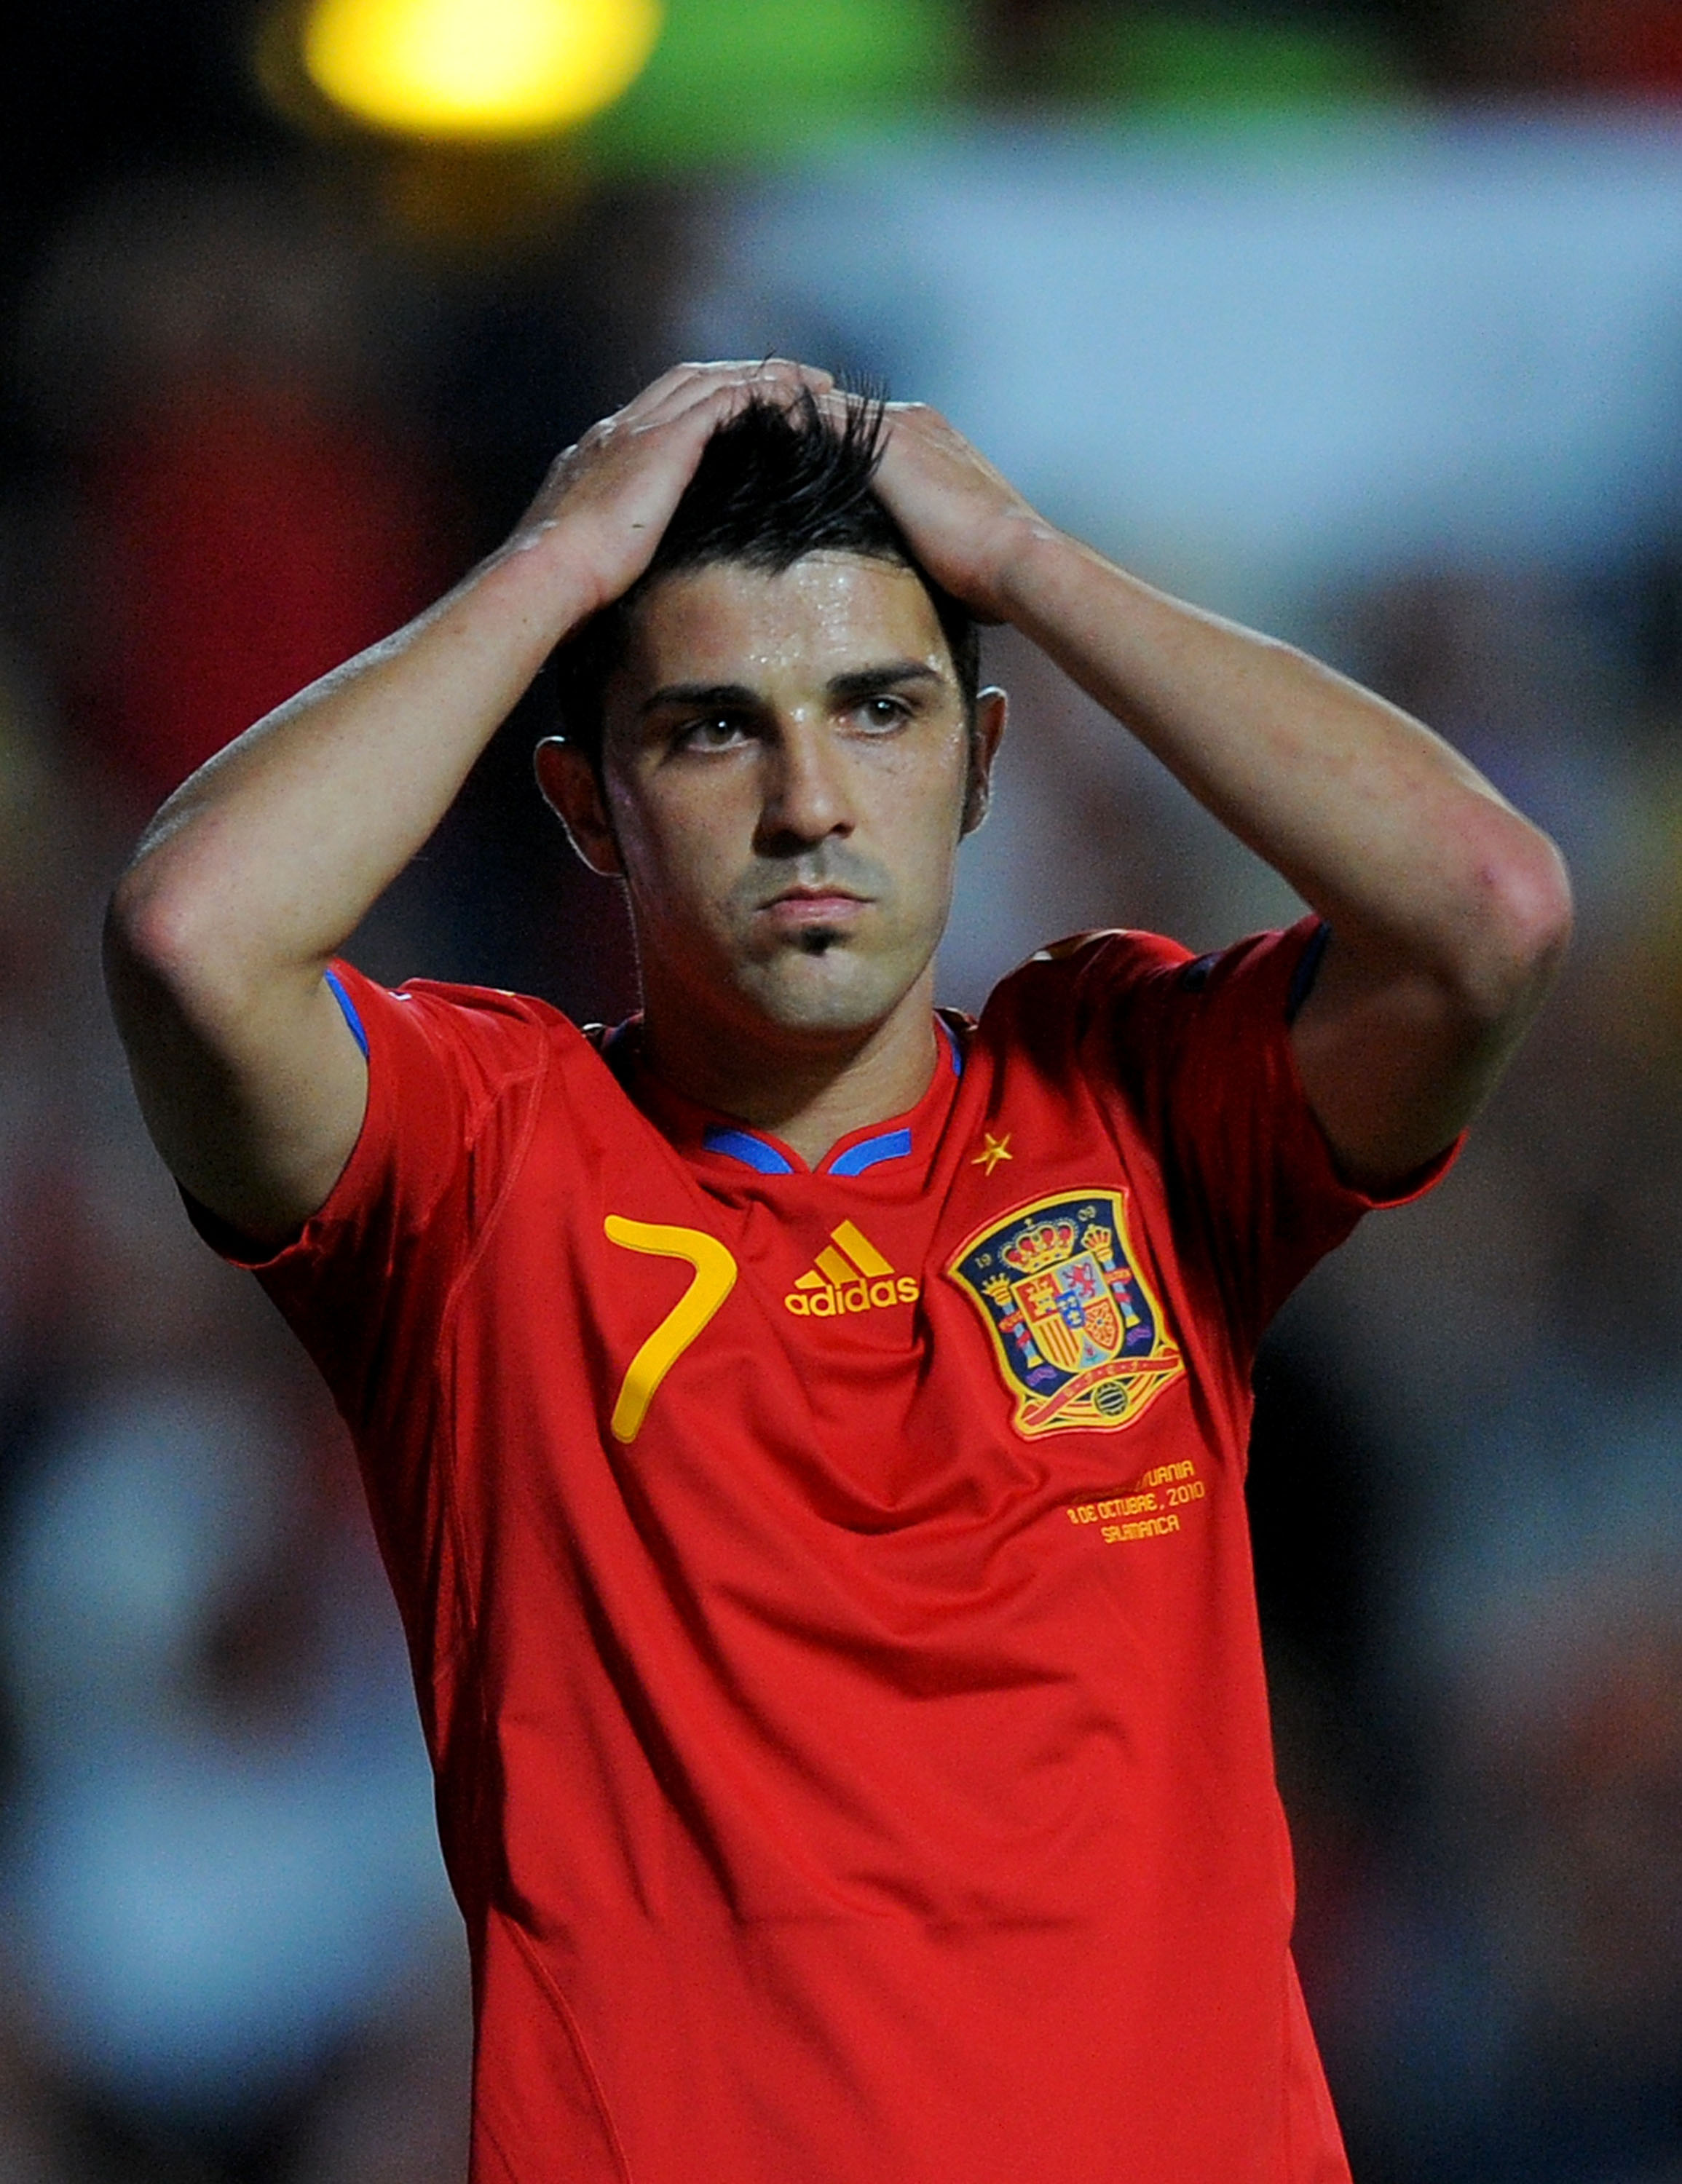 SALAMANCA, SPAIN - OCTOBER 08: David Villa of Spain reacts during the EURO 2012 Qualifying Group I match between Spain and Lithuania at the Helmantico stadium on October 8, 2010 in Salamanca, Spain.  (Photo by Denis Doyle/Getty Images)